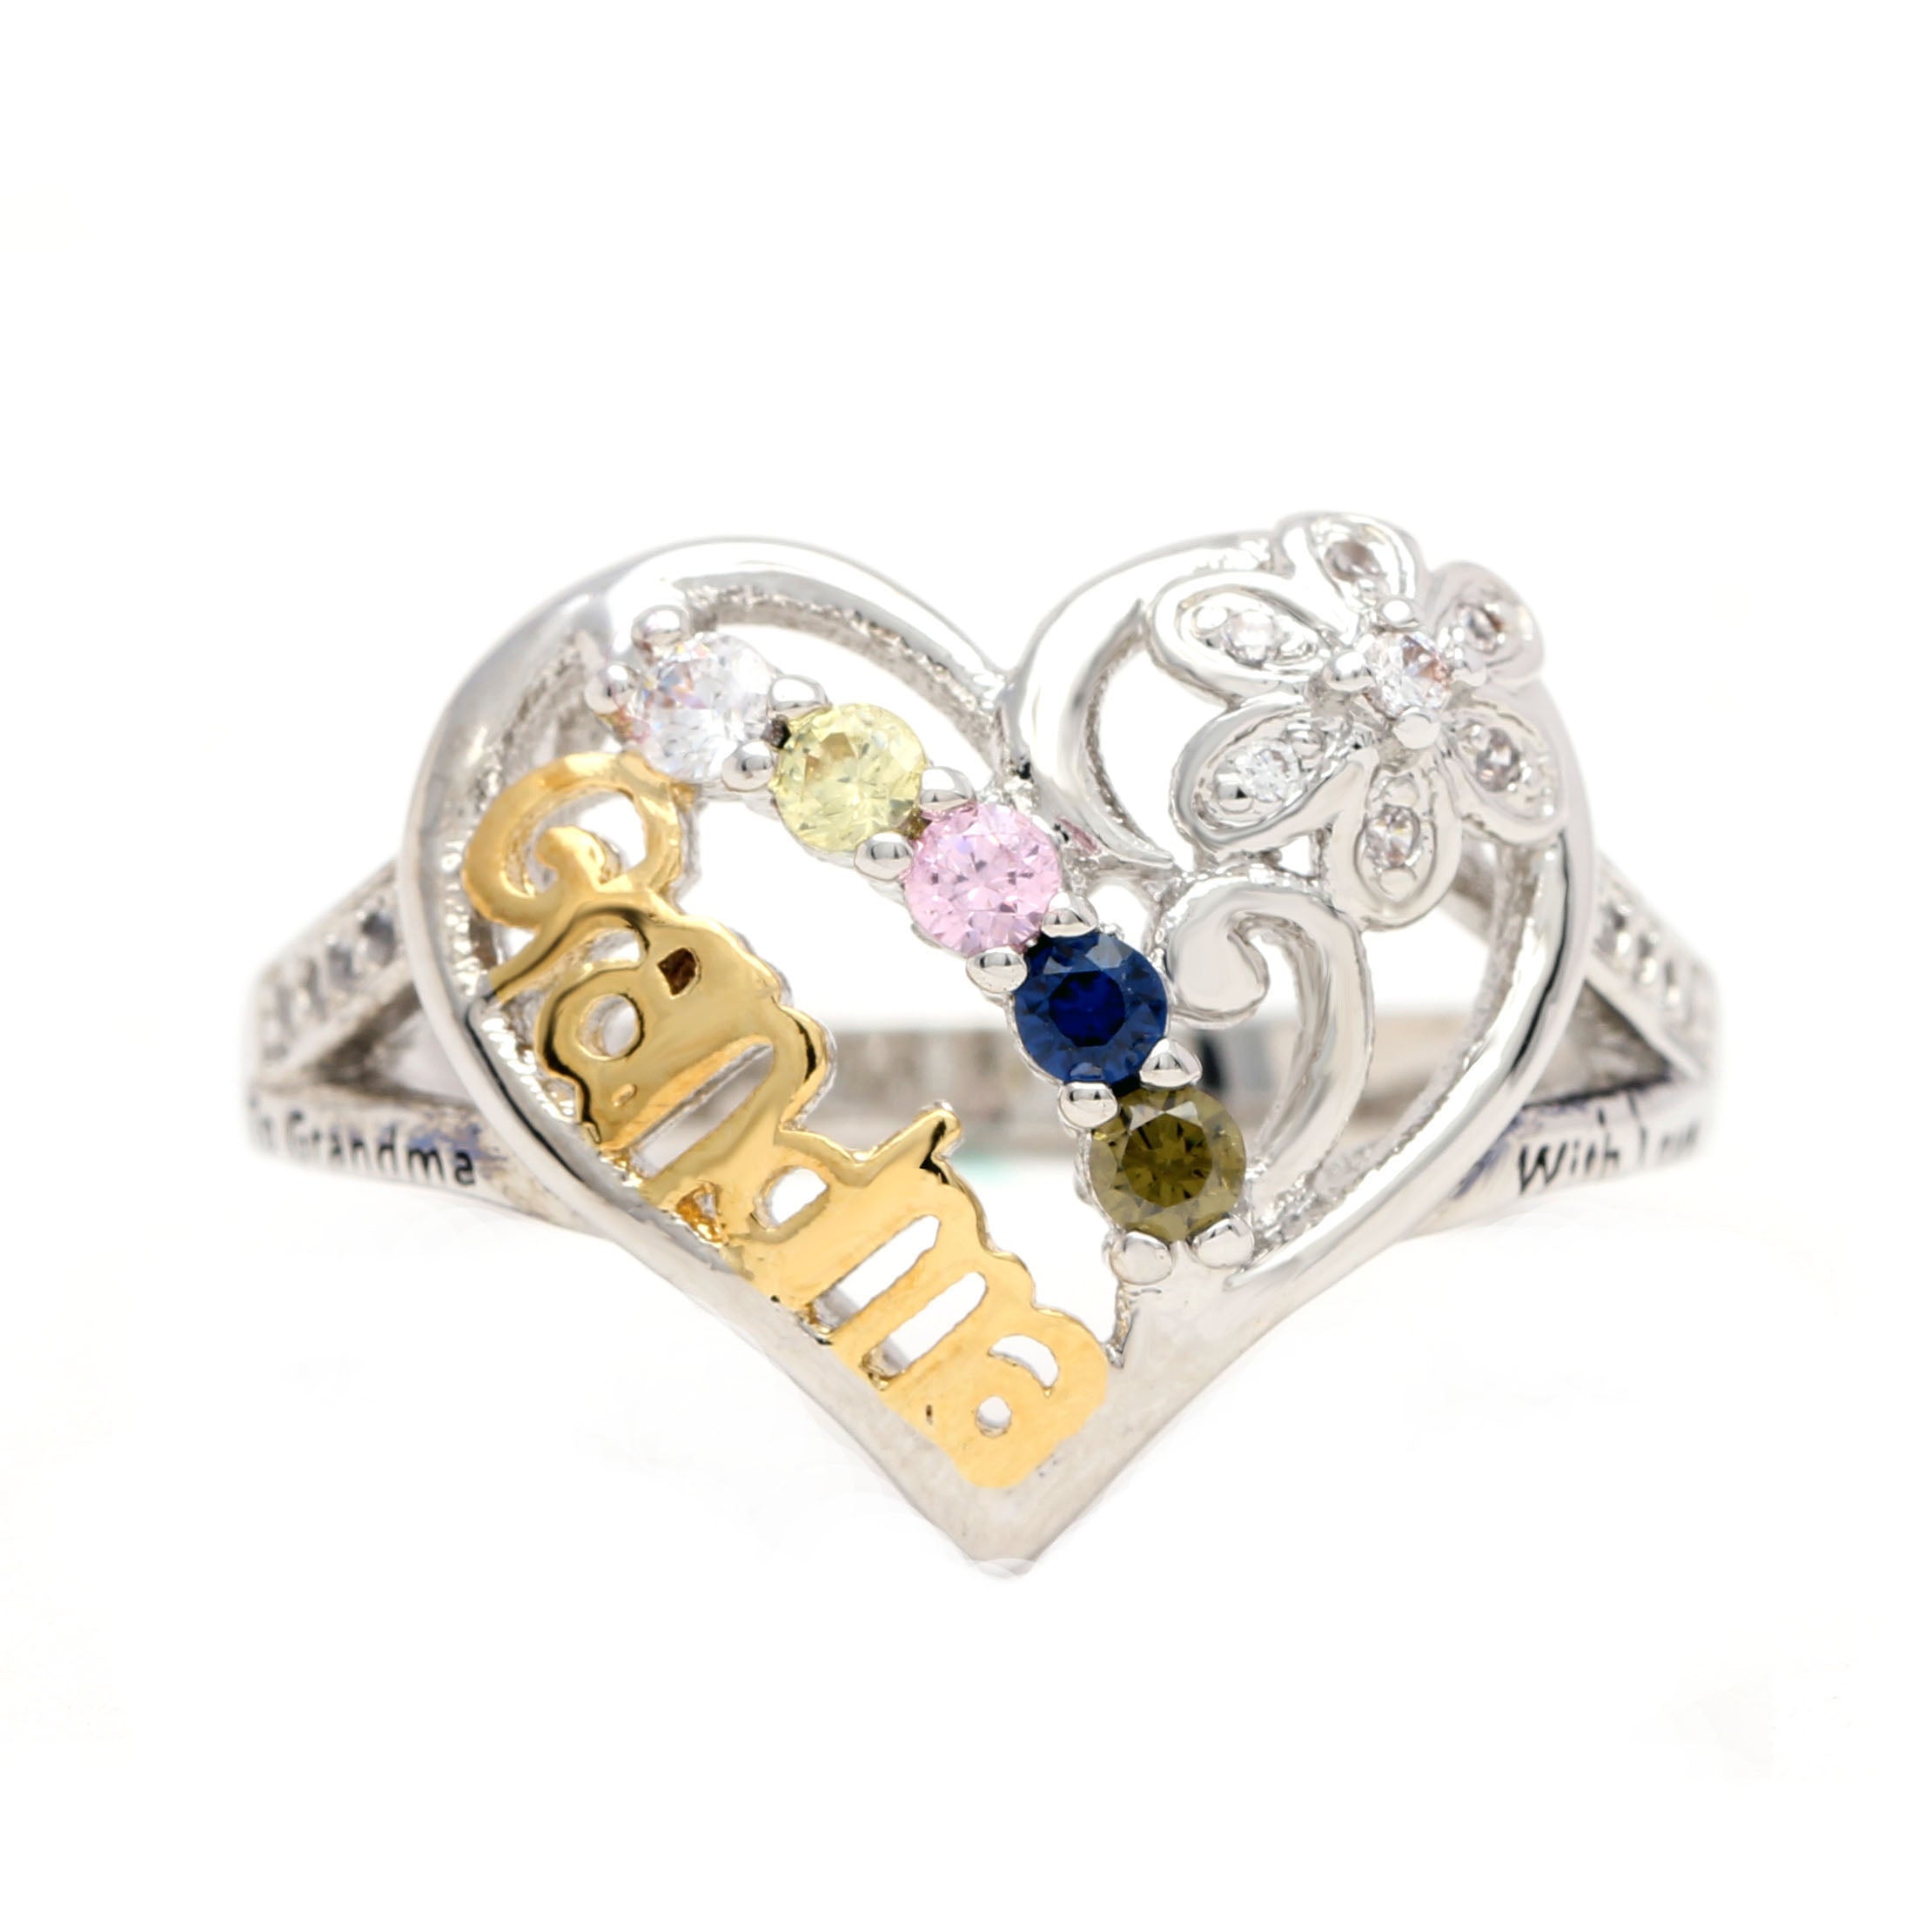 Heart Ring Inscribed To Grandma With Love Plated Cz Womens Ginger Lyne - 10